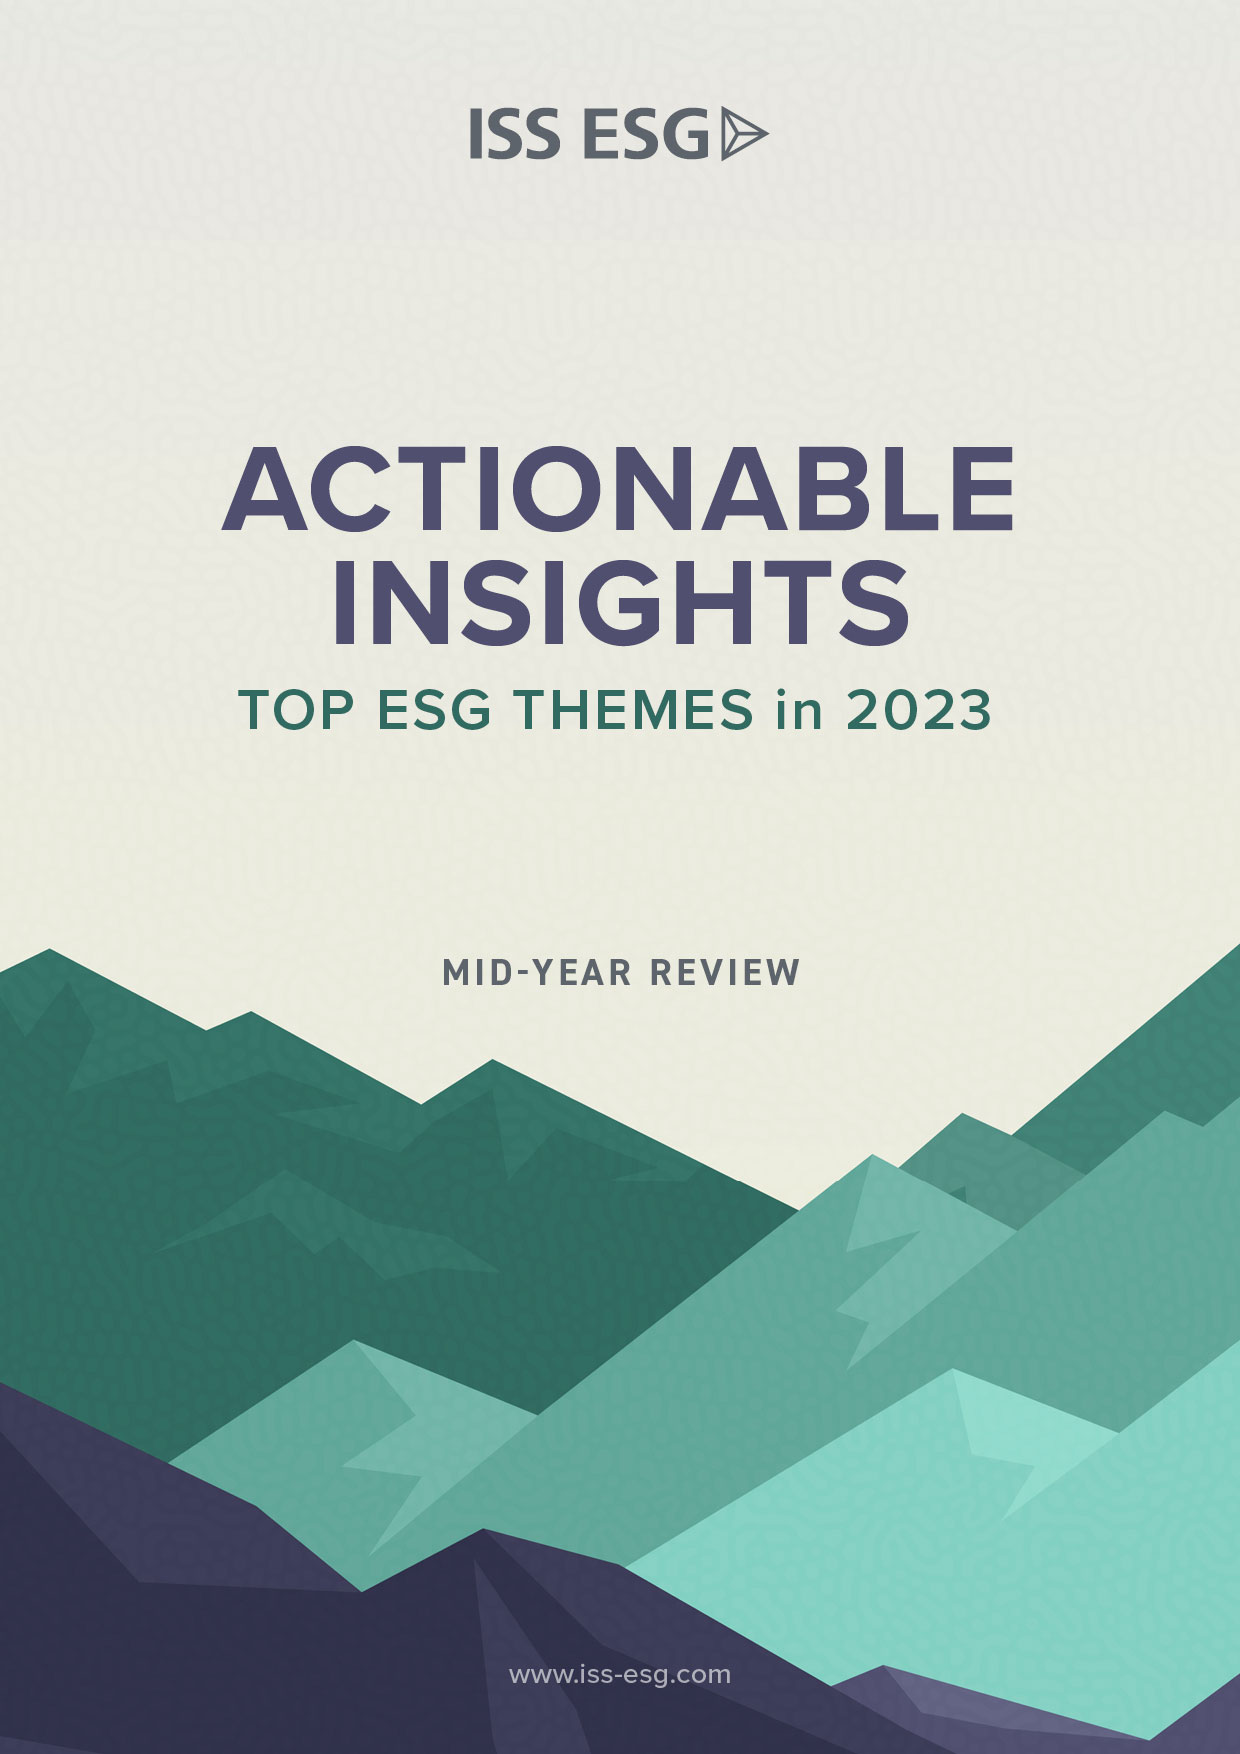 ISS ESG Actionable Insights Top ESG Themes in 2023 Global cover